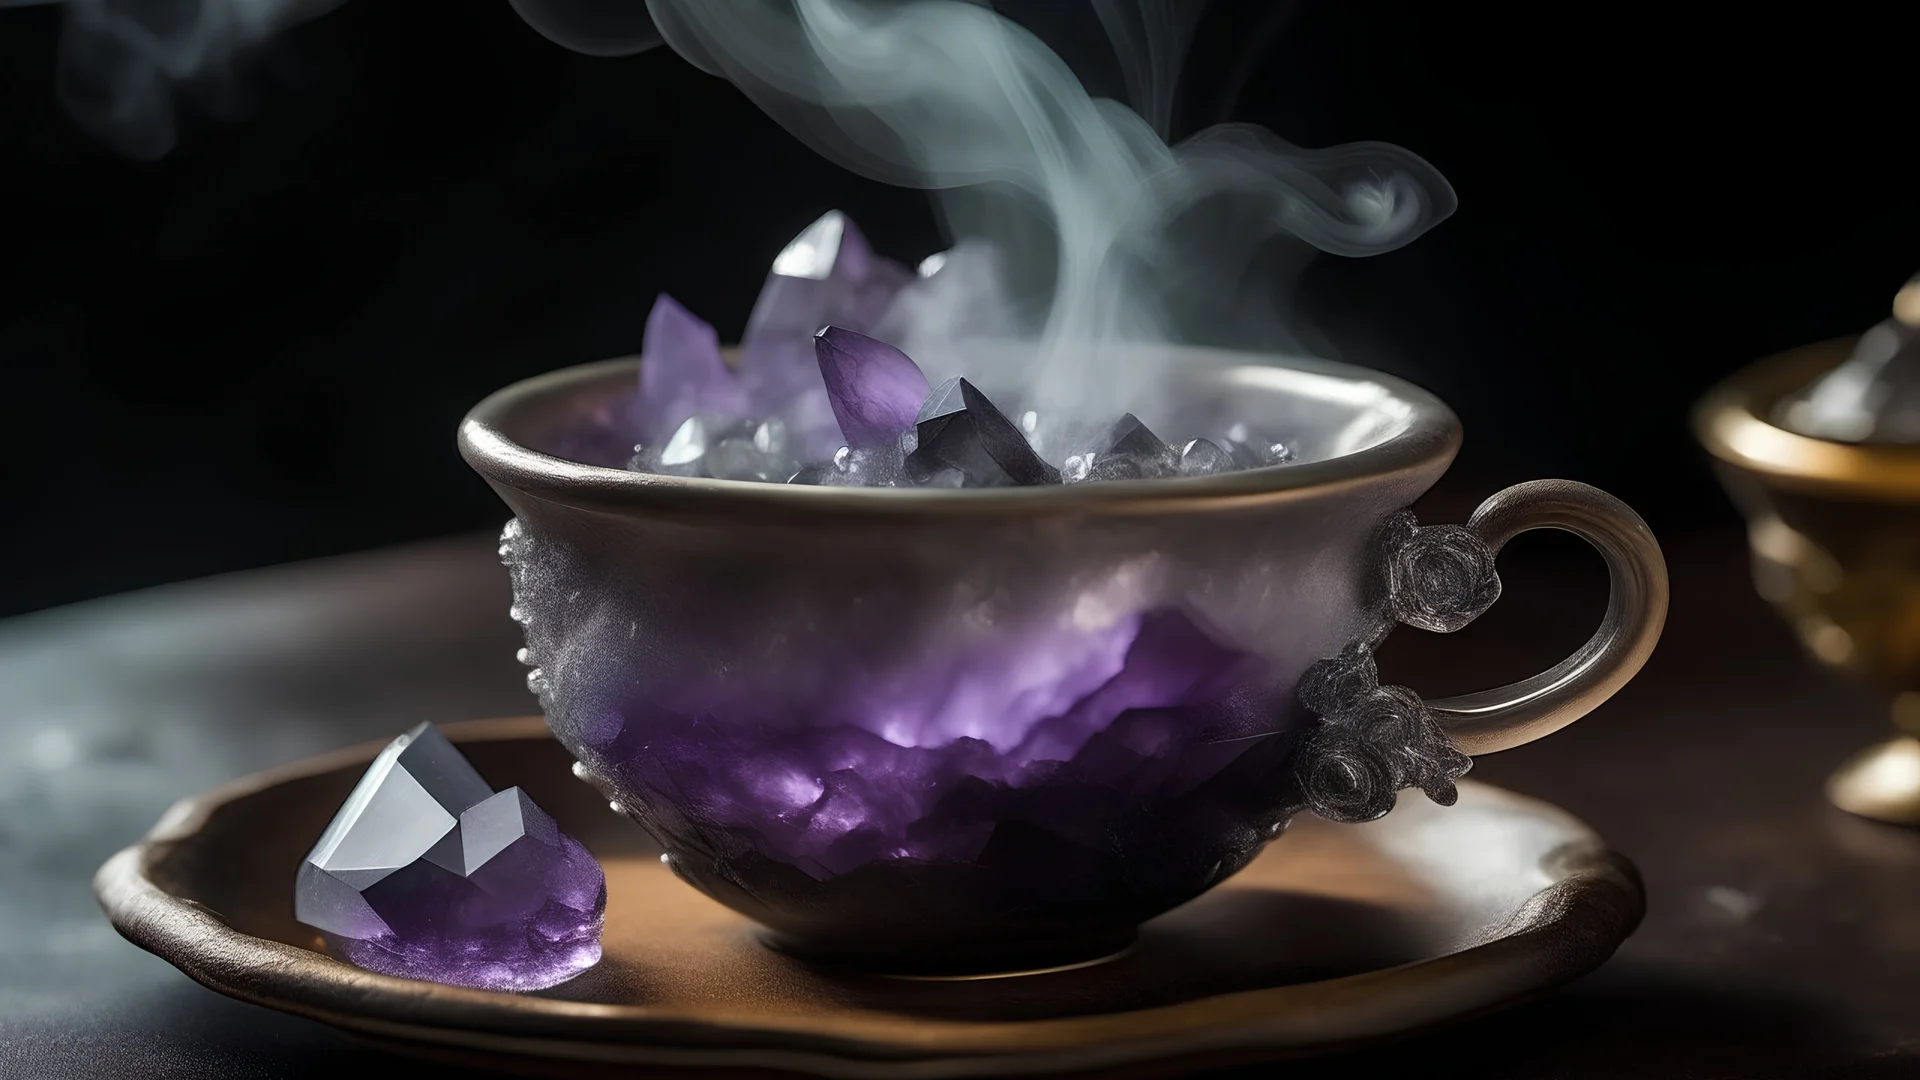 Stunning amethyst crystals rising as steam from a cup of tea.